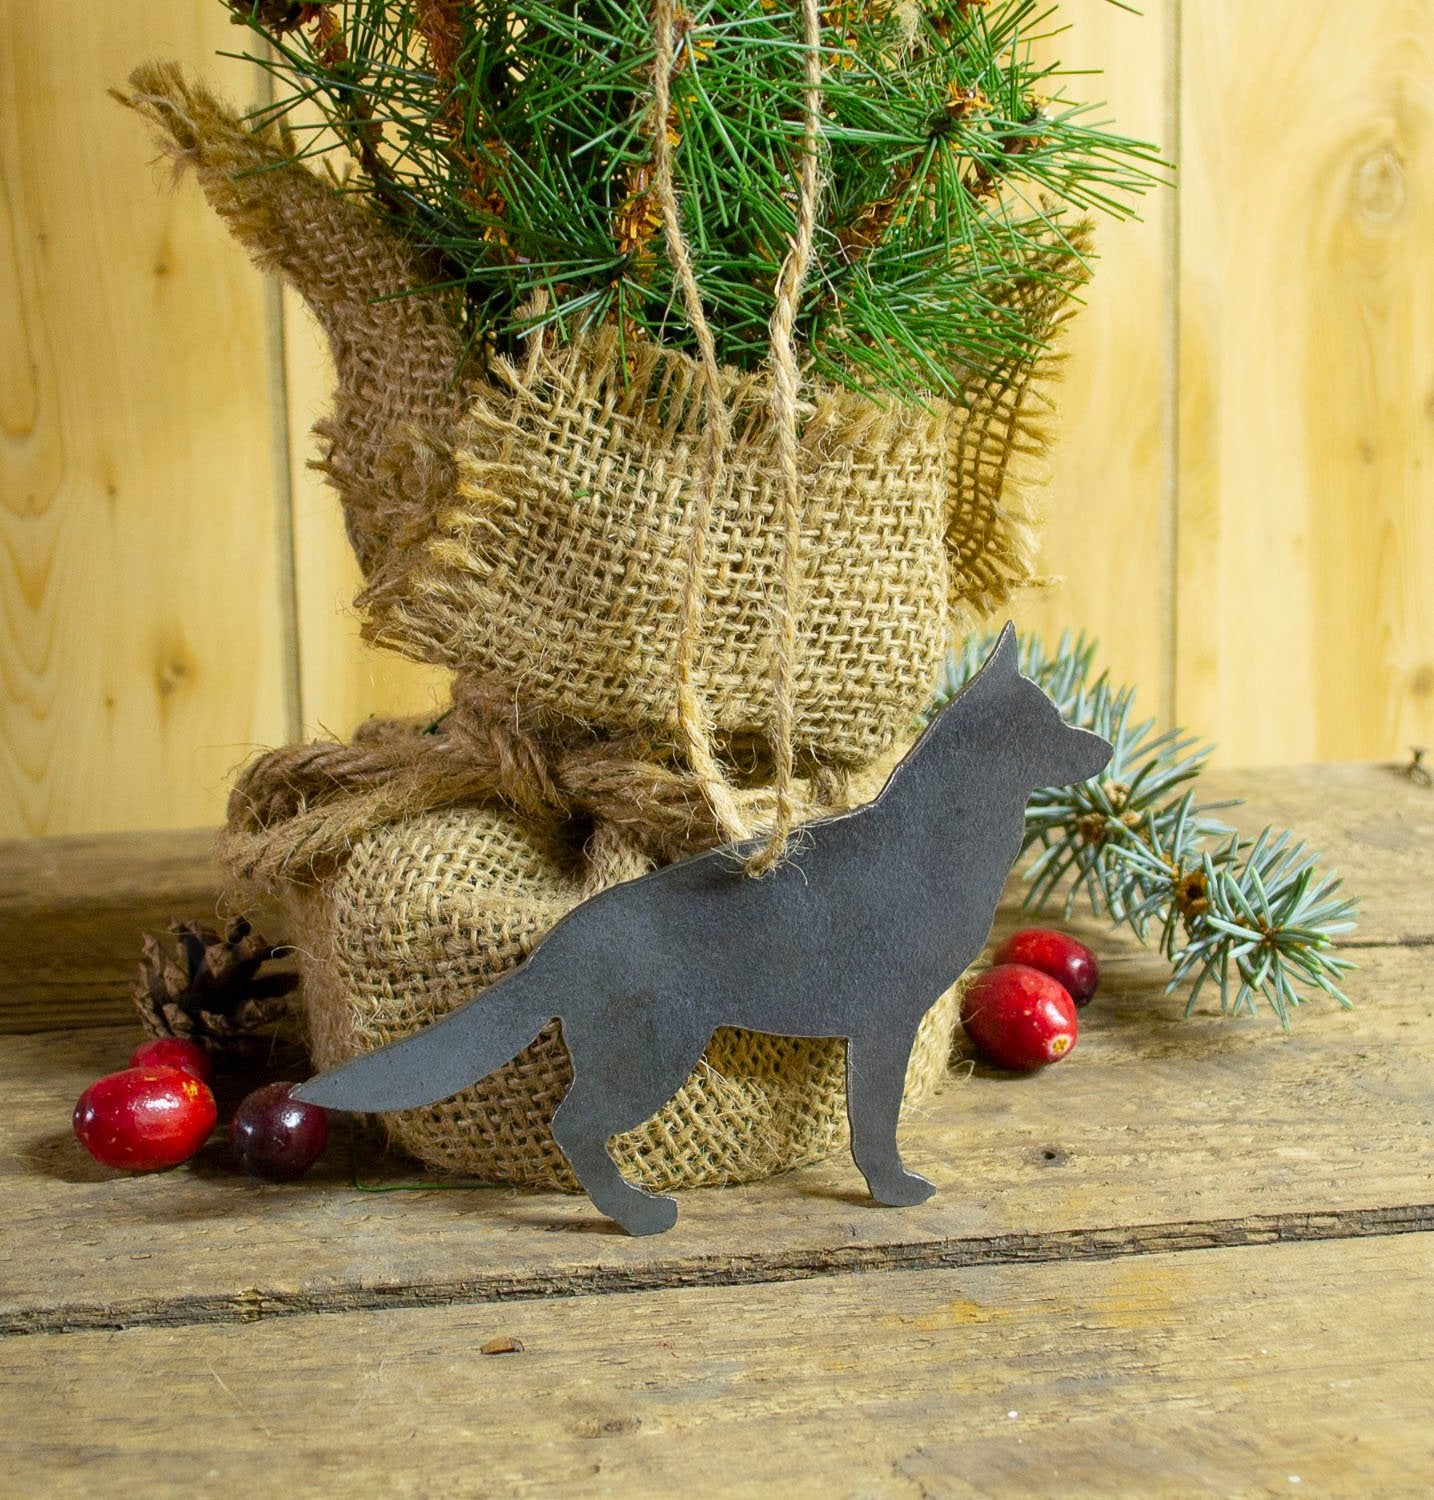 German Shepherd Dog Metal Christmas Ornament Tree Stocking Stuffer Party Favor Holiday Decoration Raw Steel Gift Recycled Nature Home Decor